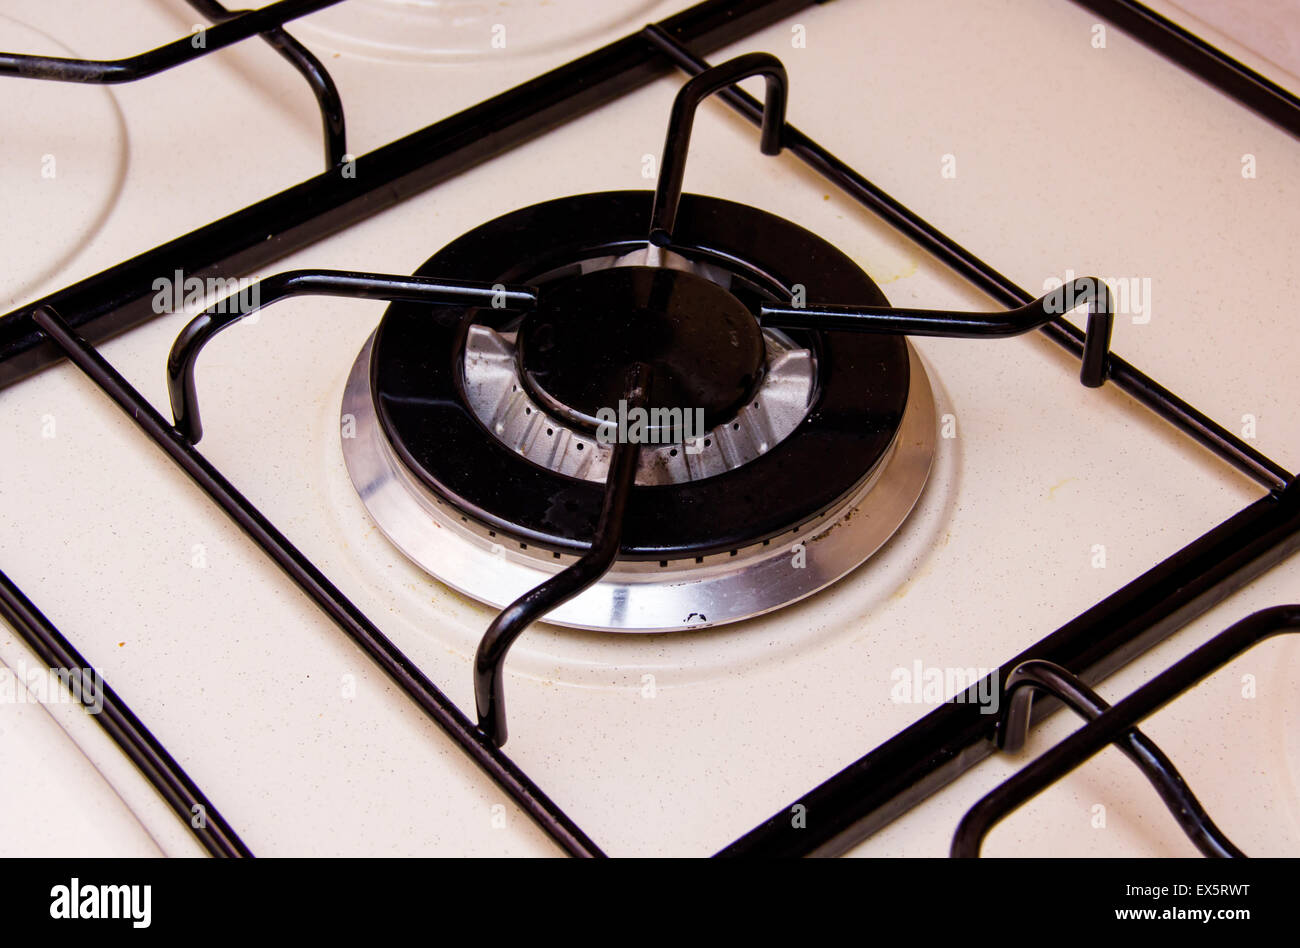 Stove burner seen up close from above Stock Photo